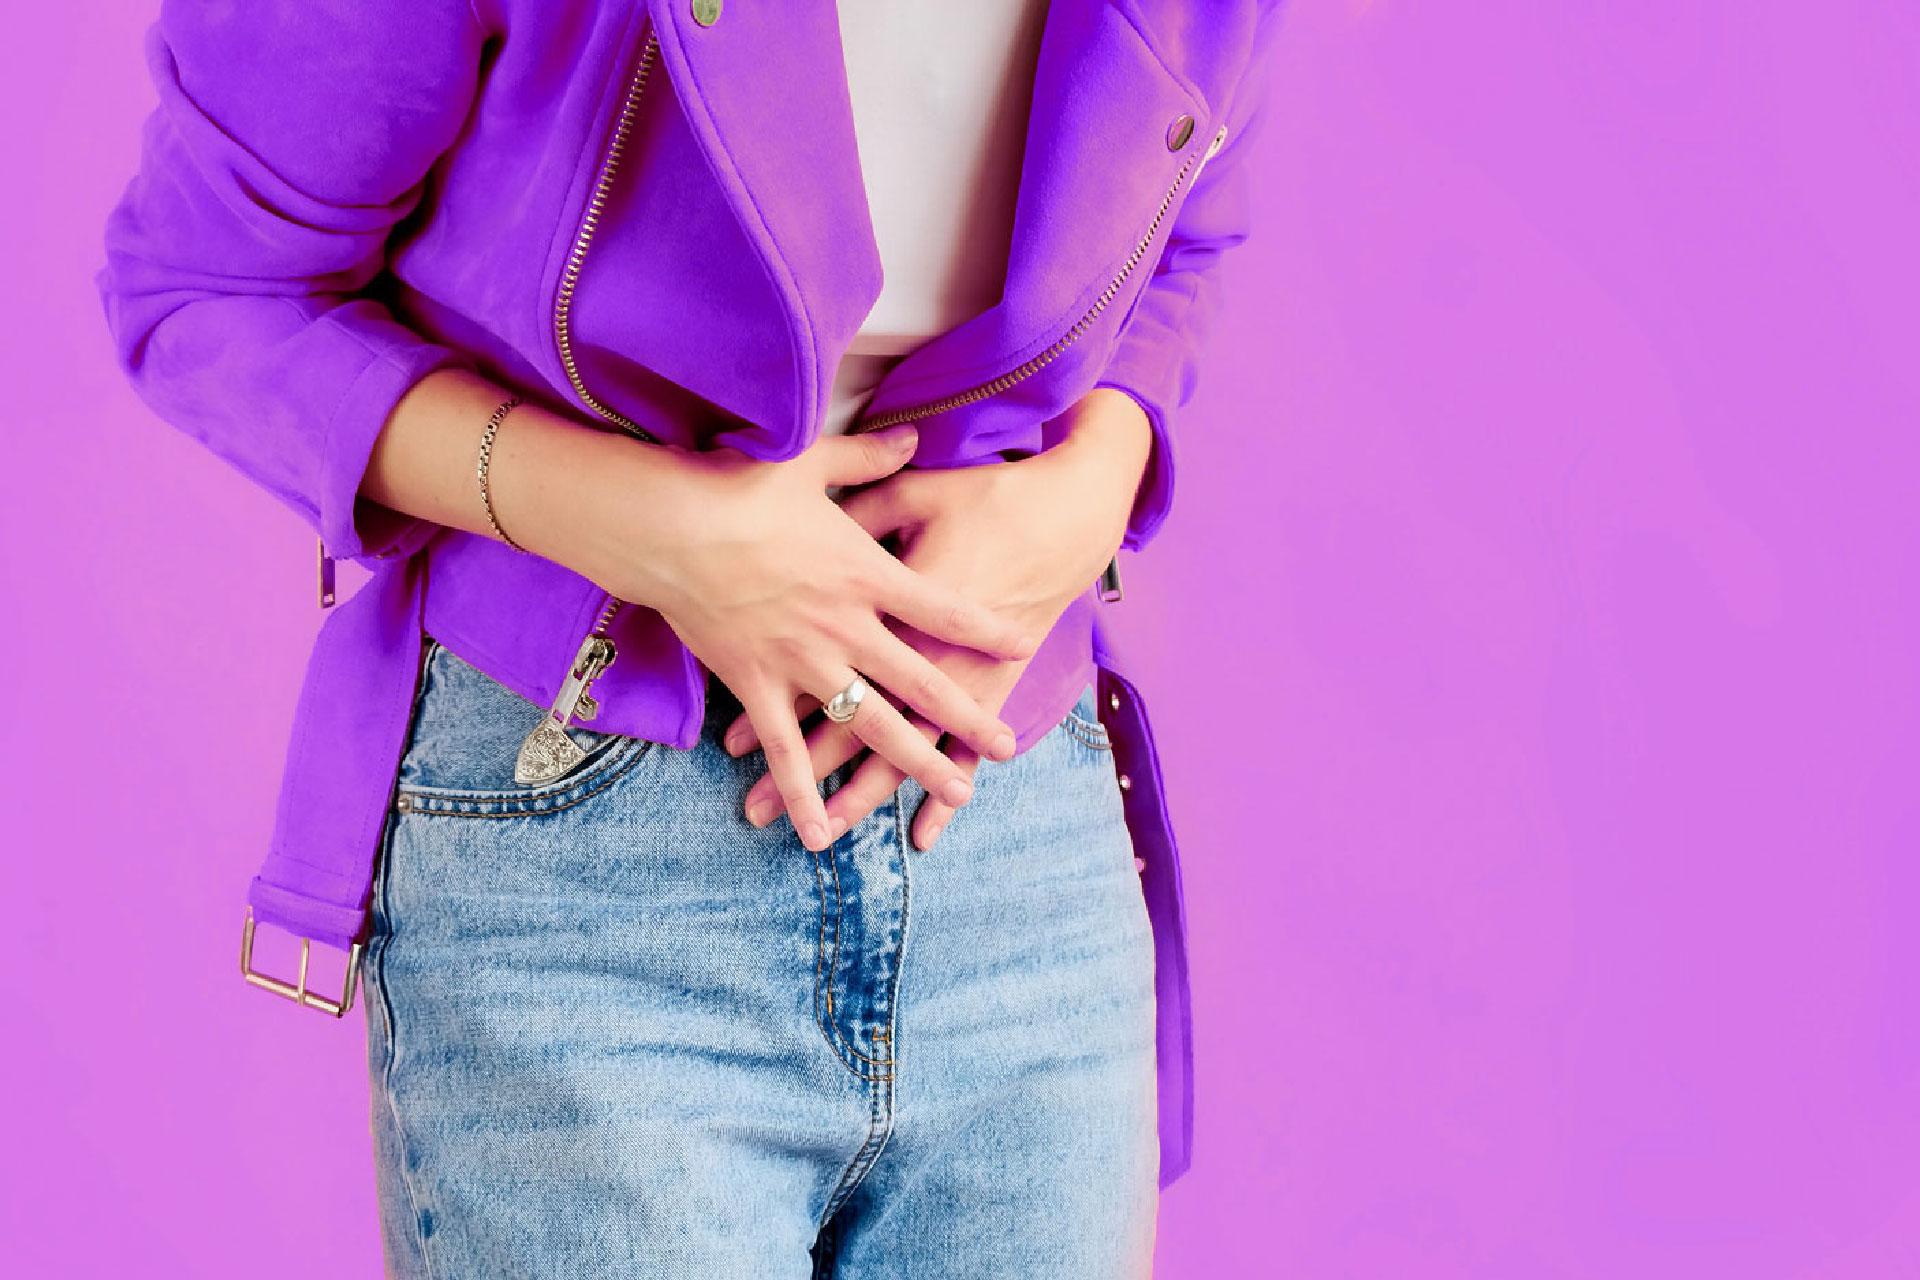 Uterine Fibroids: 3 Important Things for You to Know